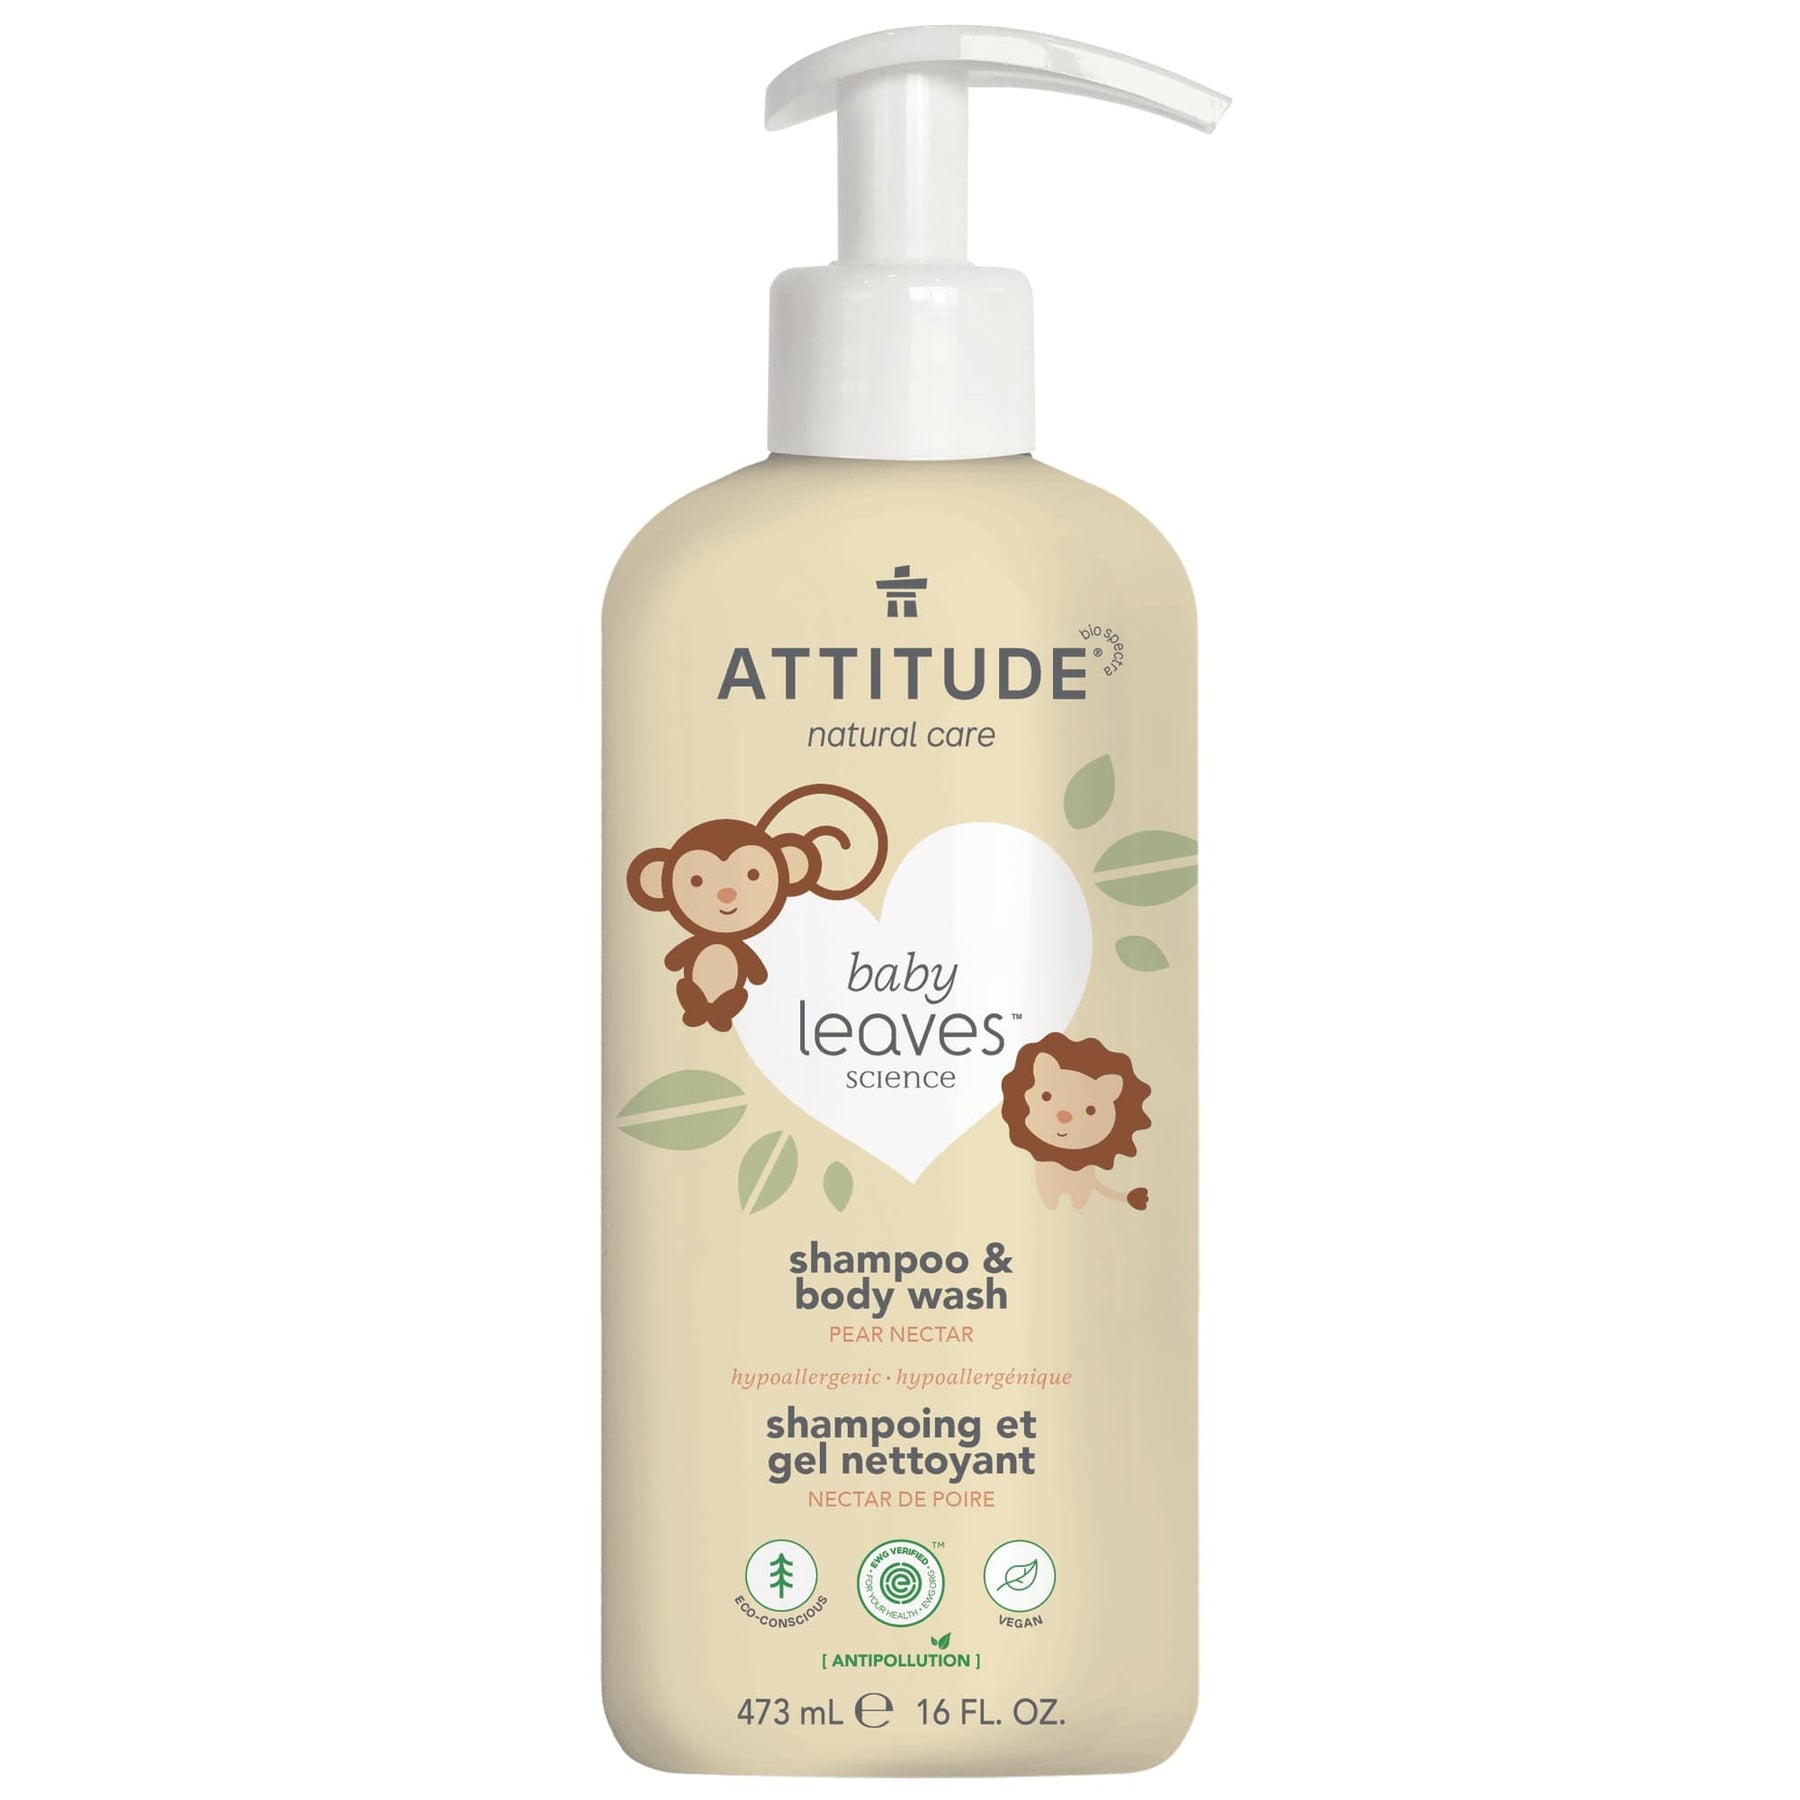 Attitude - 2-in-1 Shampoo & Body Wash : BABY LEAVES™ - Pear Nectar - by Attitude |ProCare Outlet|